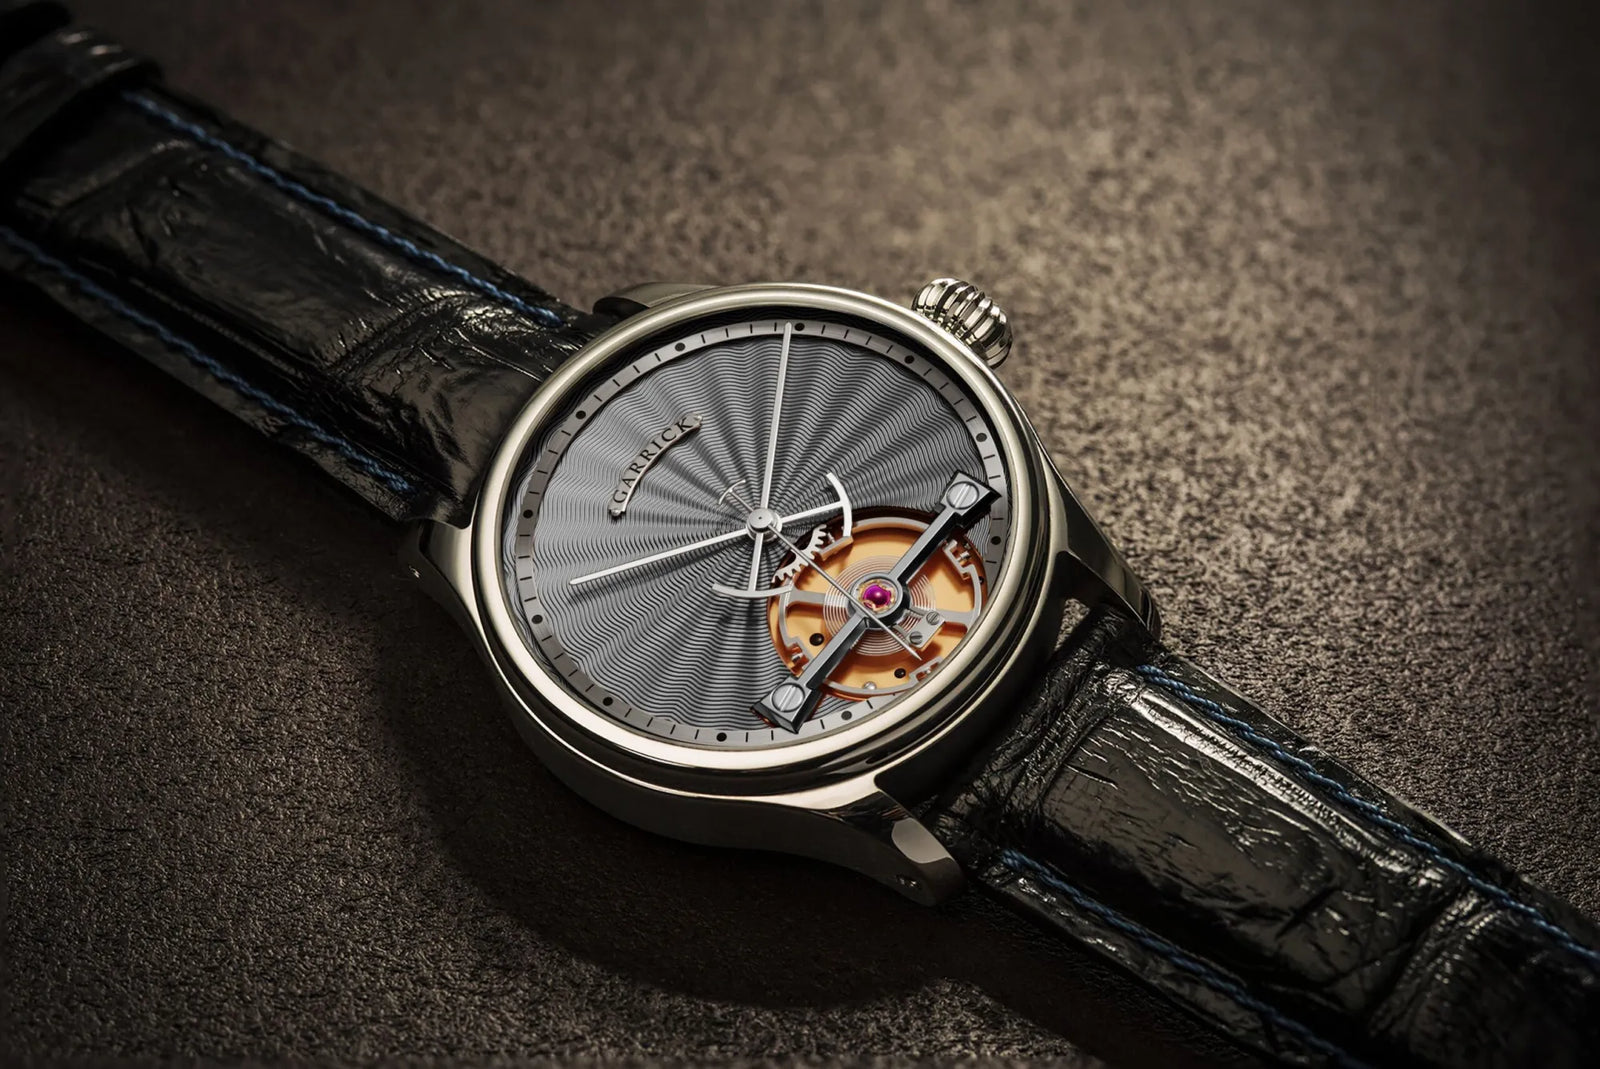 S2 Deadbeat Seconds watch with in-house watch movement by Garrick Watchmakers